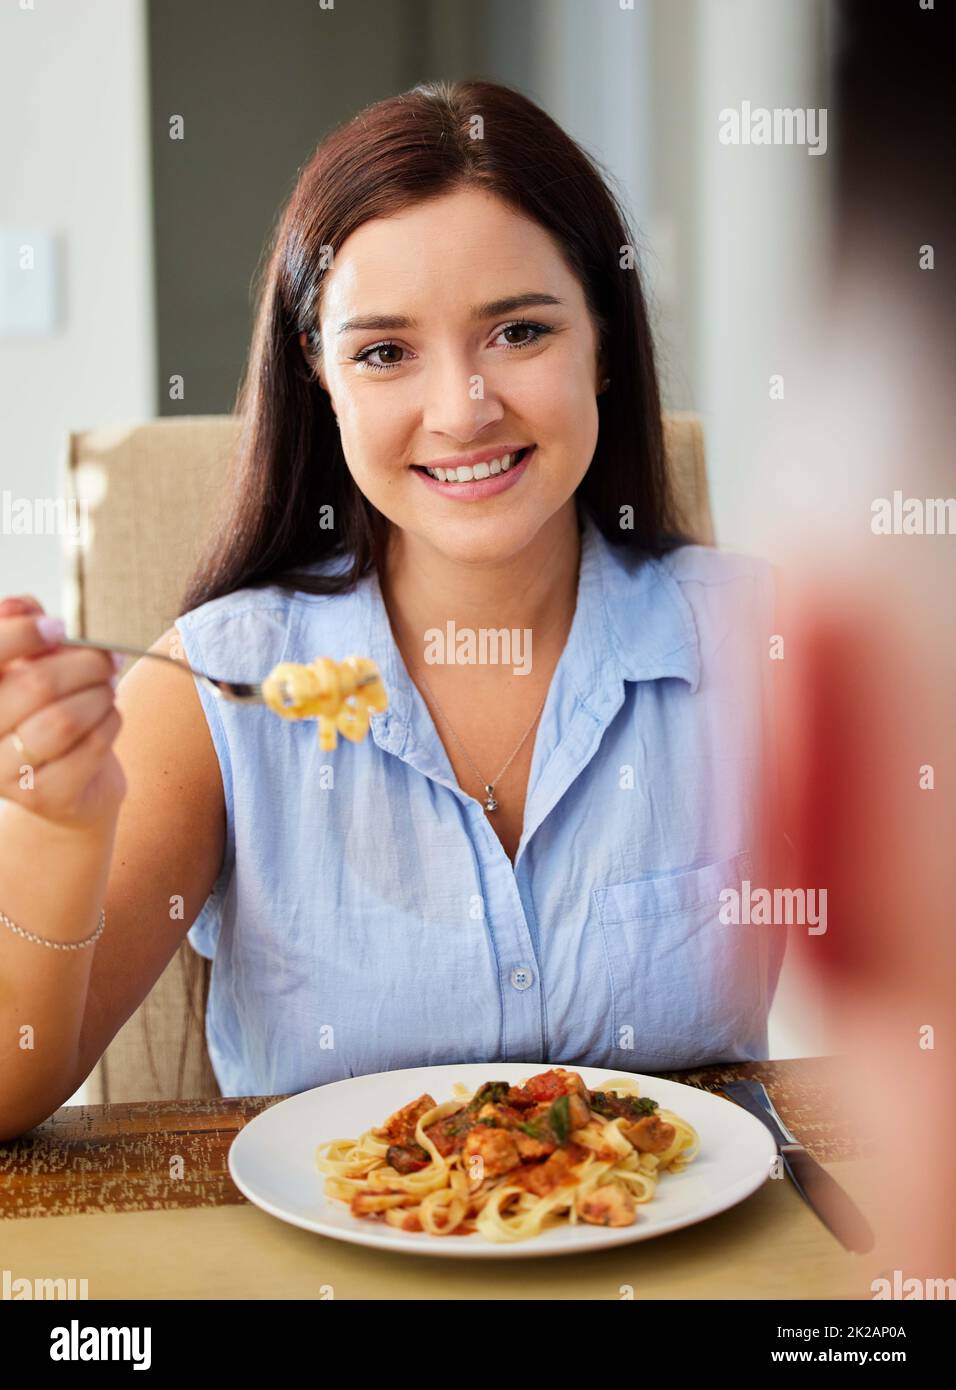 Eating a dish I love is the highlight of my day. Shot of a young woman sitting down to eat at home. Stock Photo